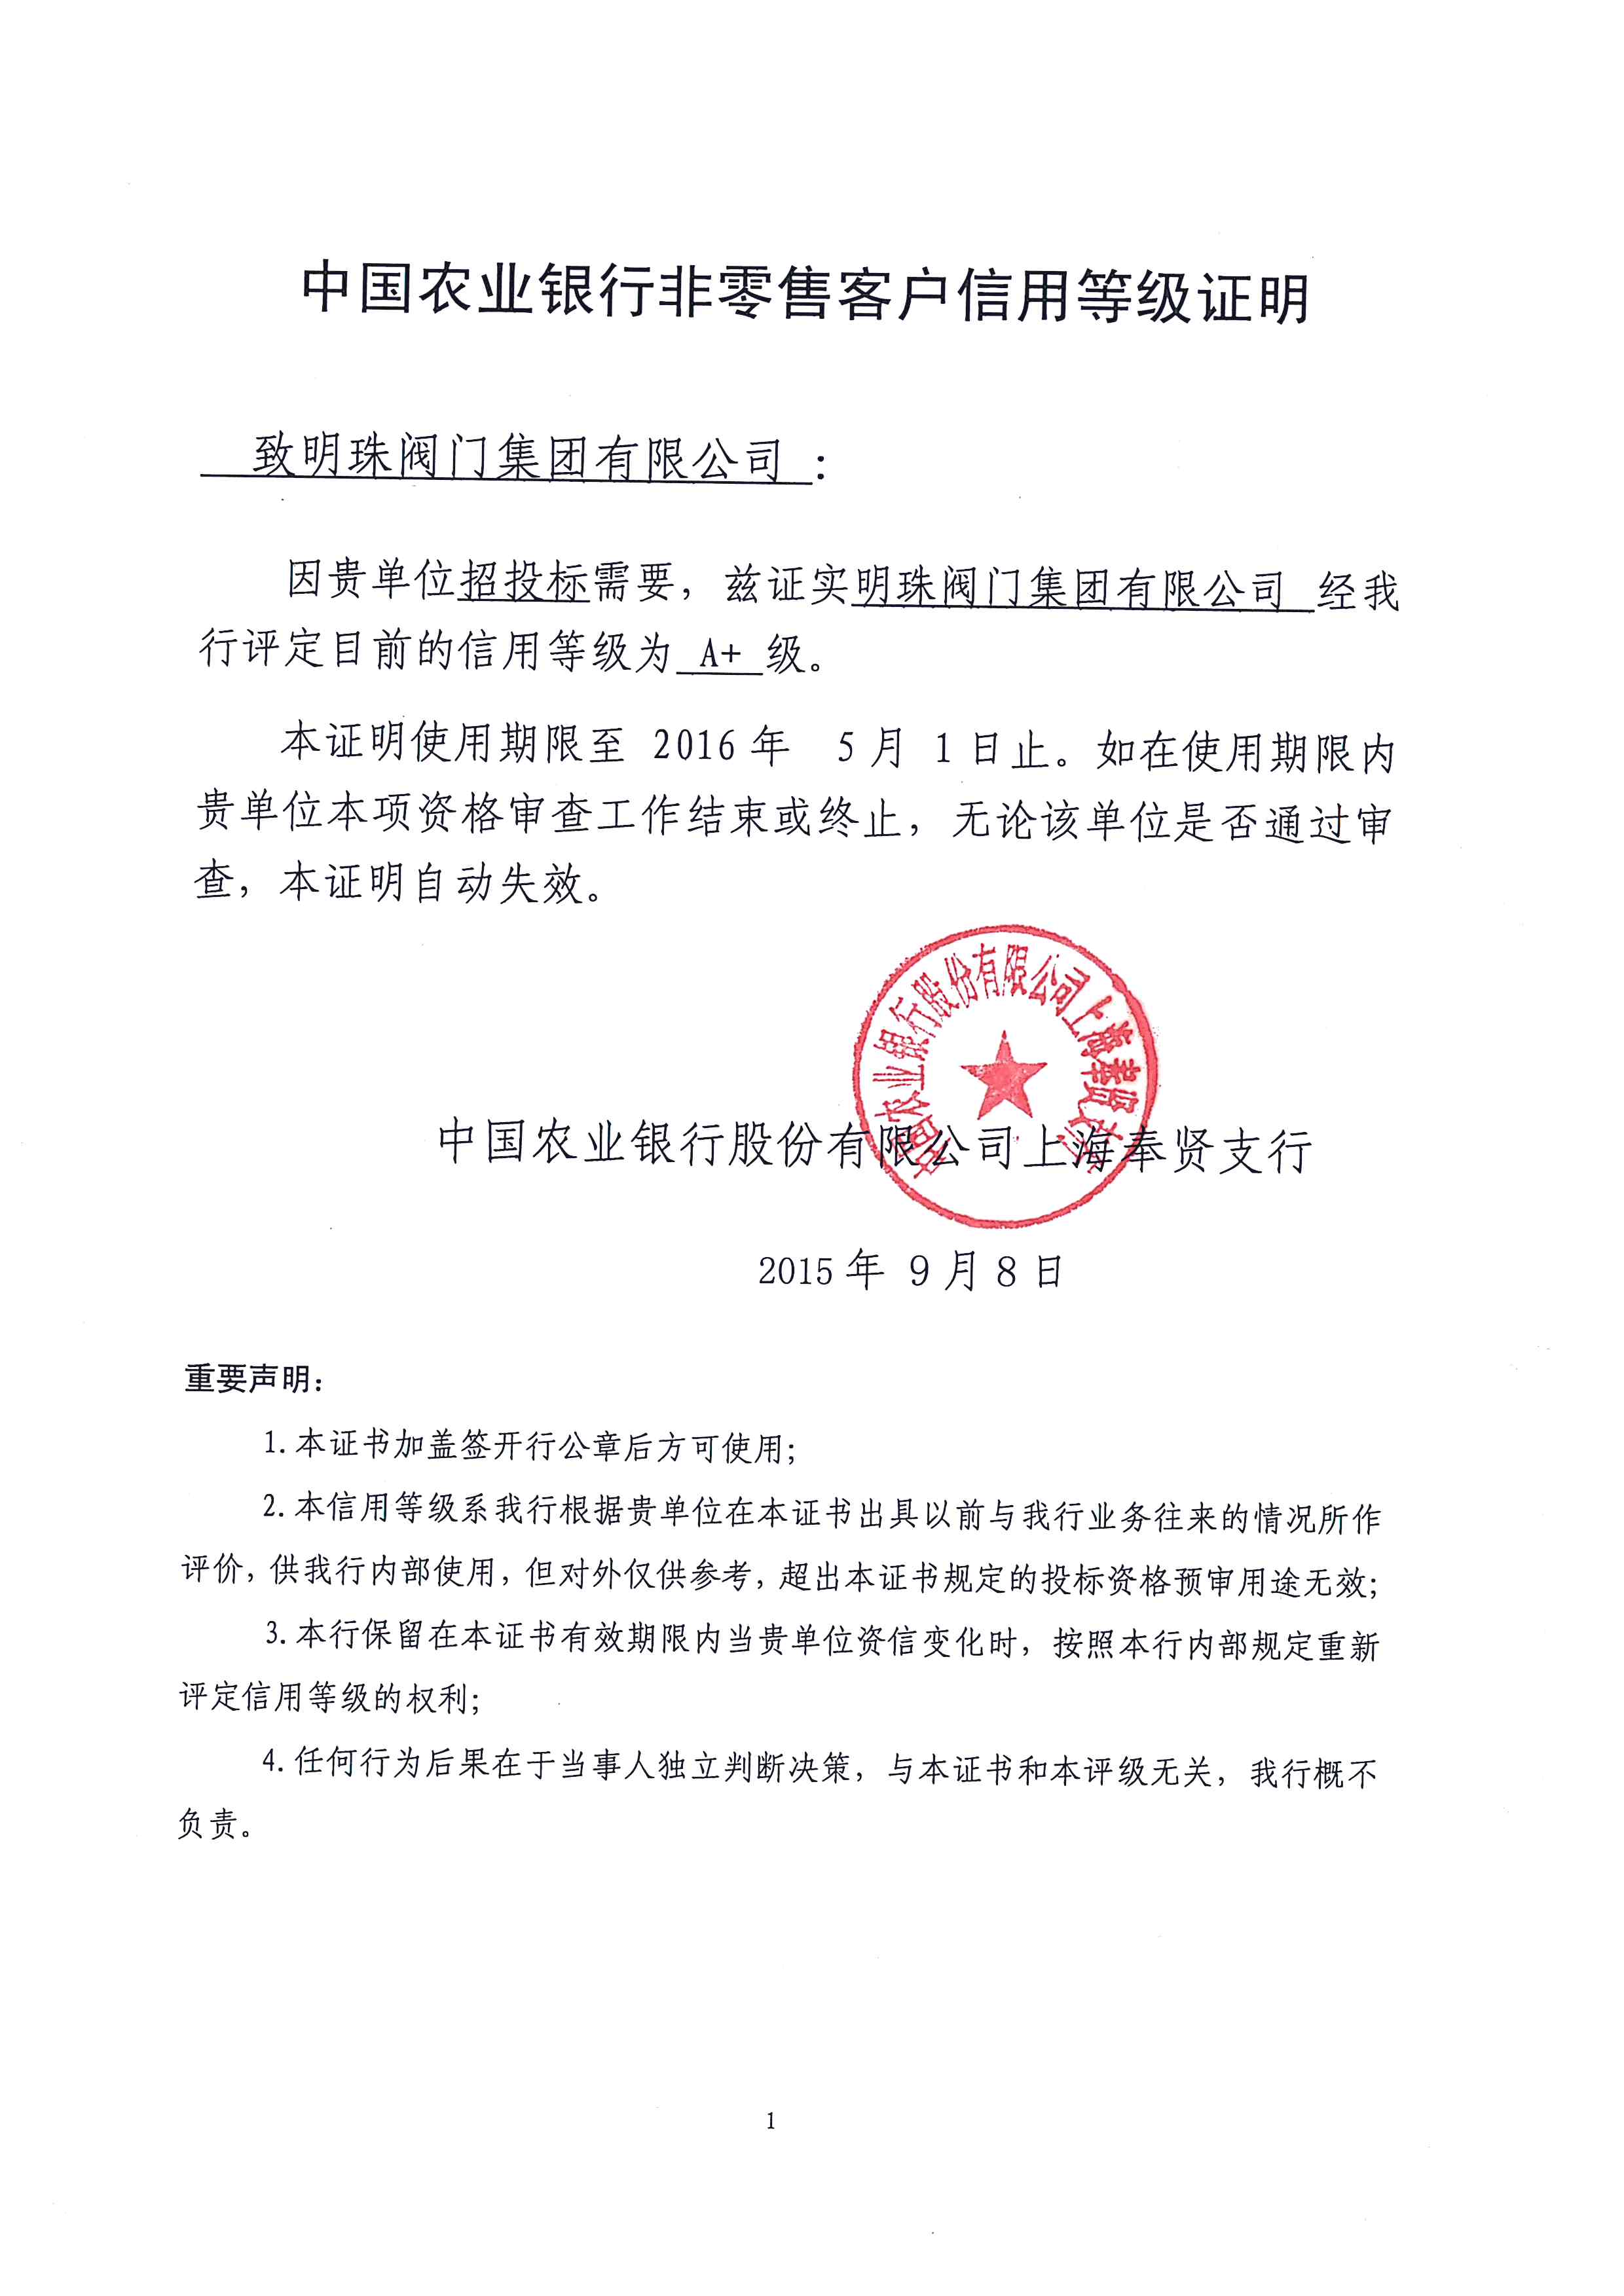 Credit rating certification of non retail customers in Agricultural Bank of China